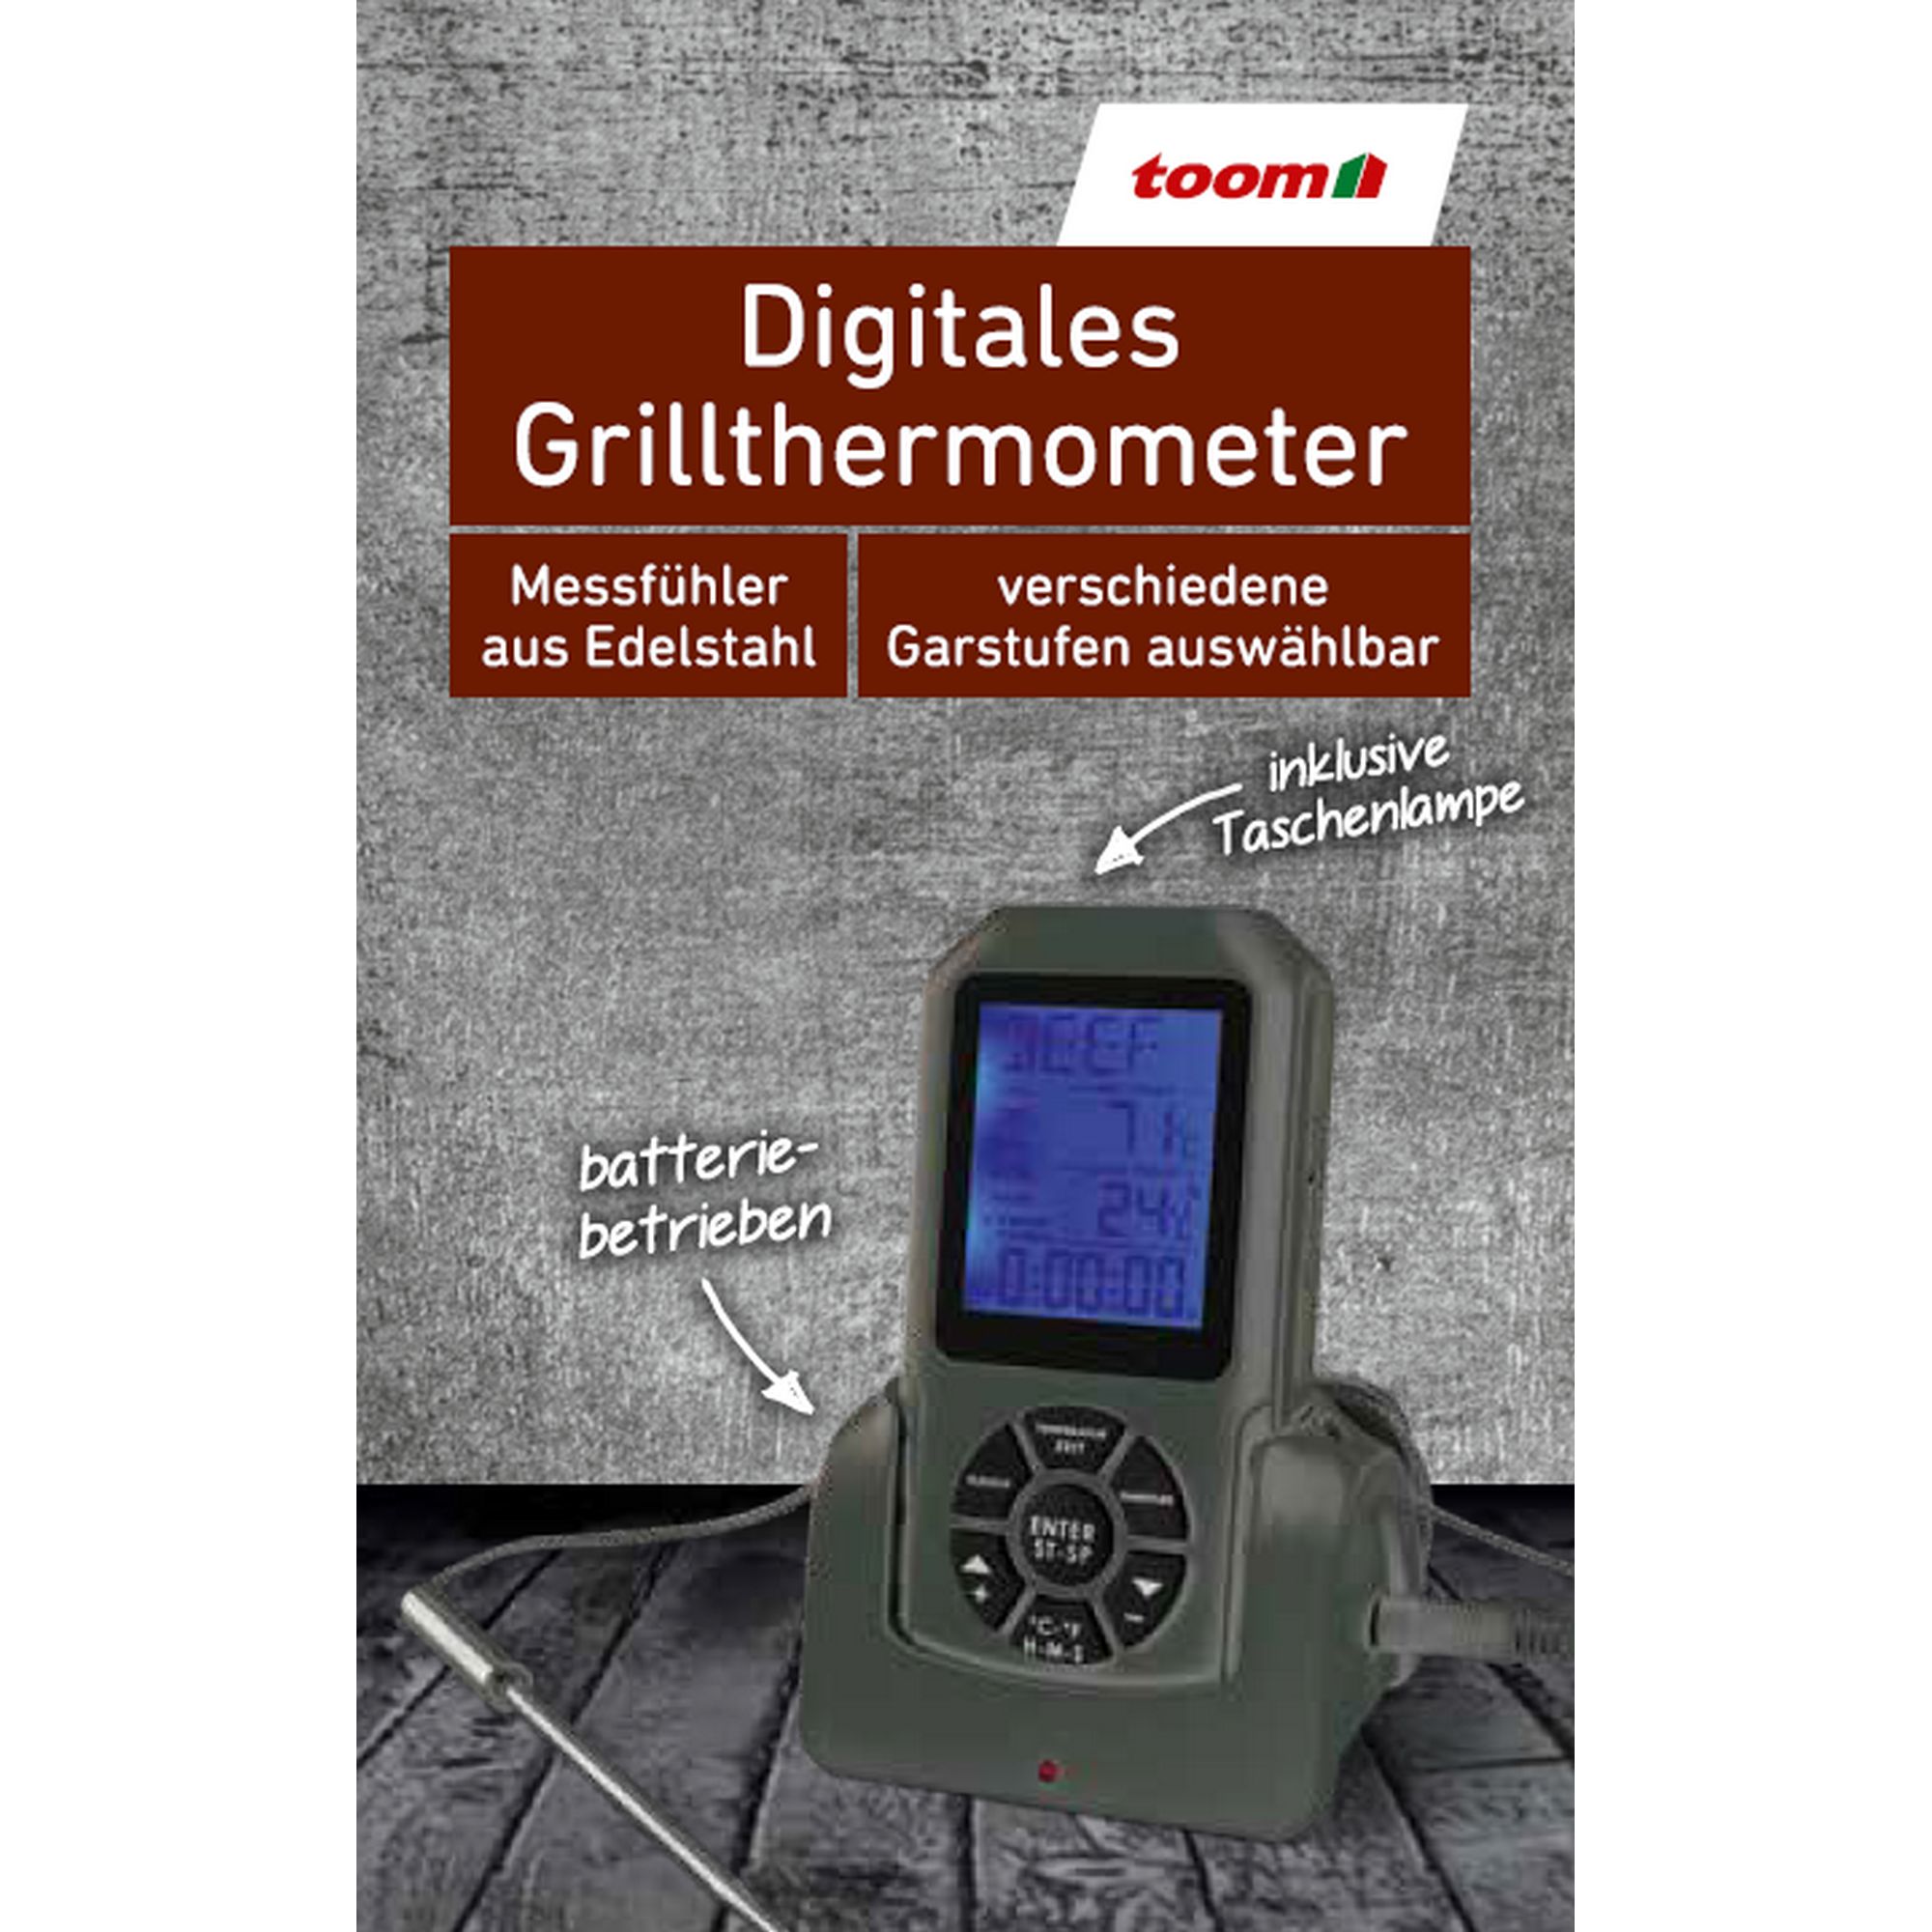 Grillthermometer digital schwarz 11 x 5,8 cm + product picture